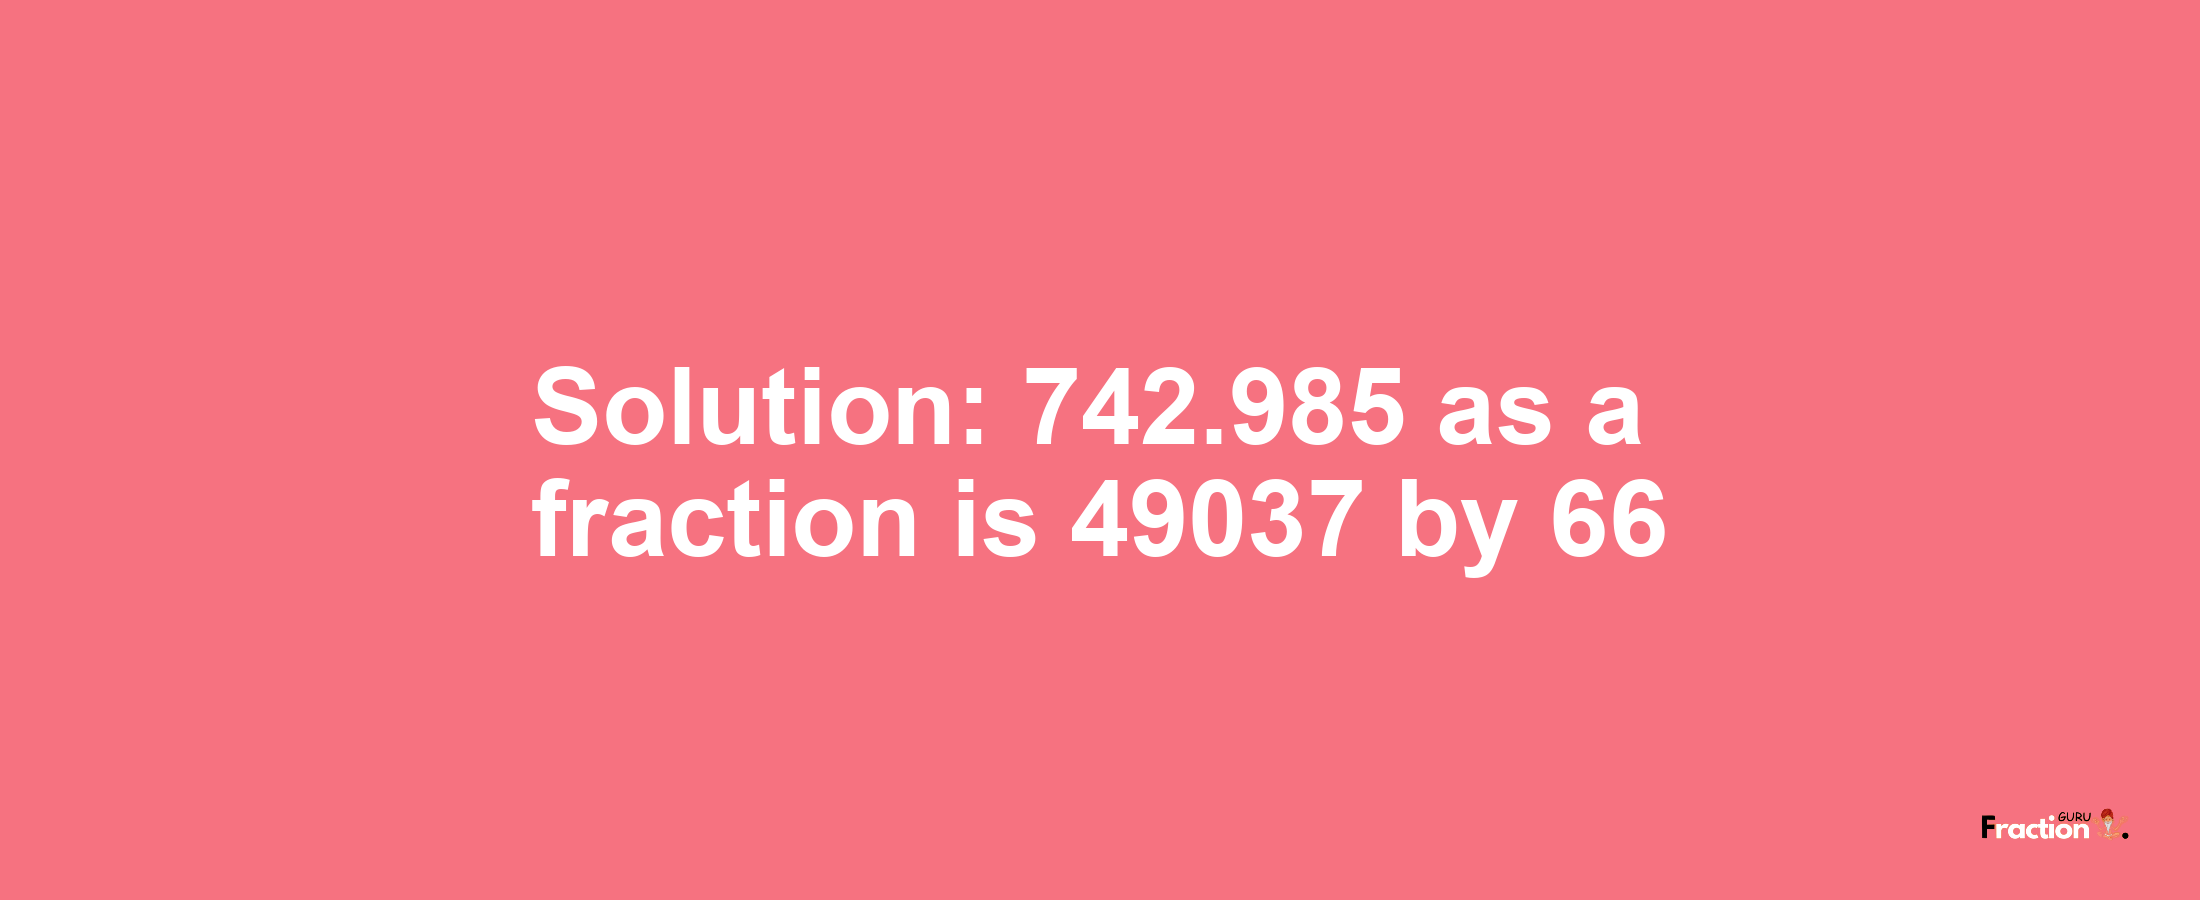 Solution:742.985 as a fraction is 49037/66